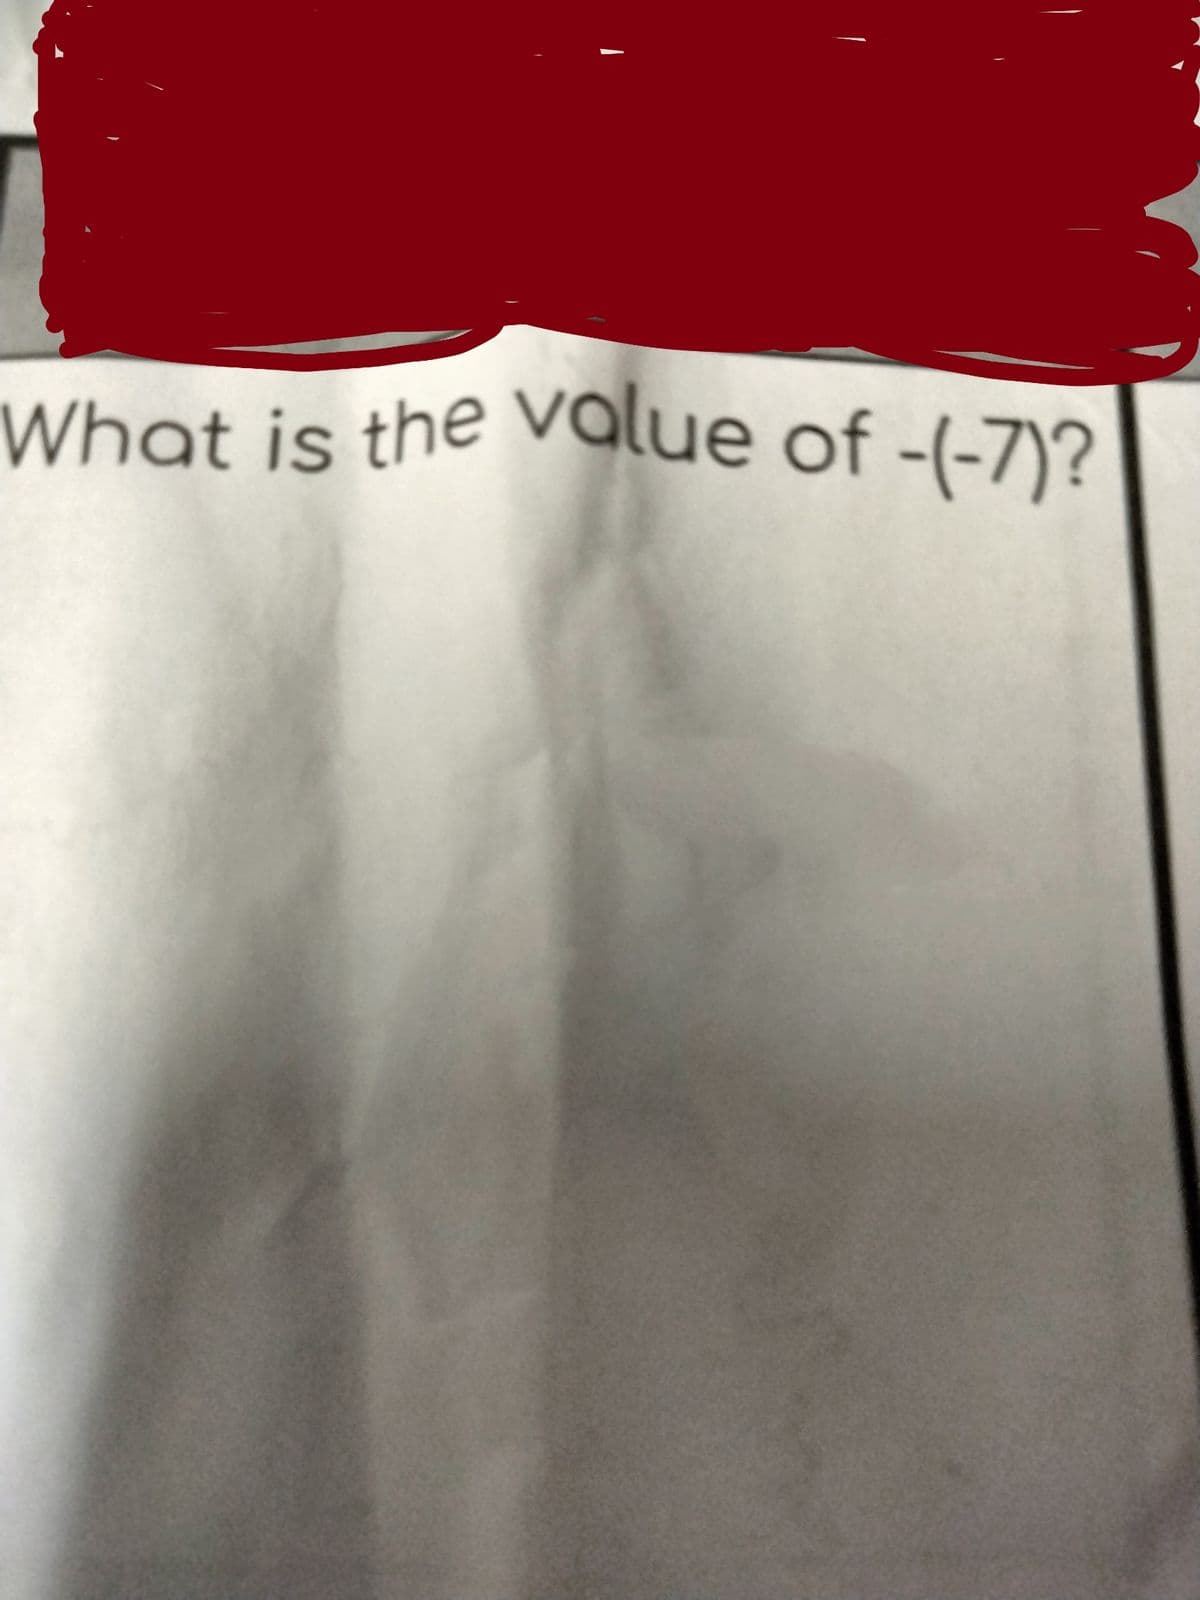 F
What is the value of -(-7)? |